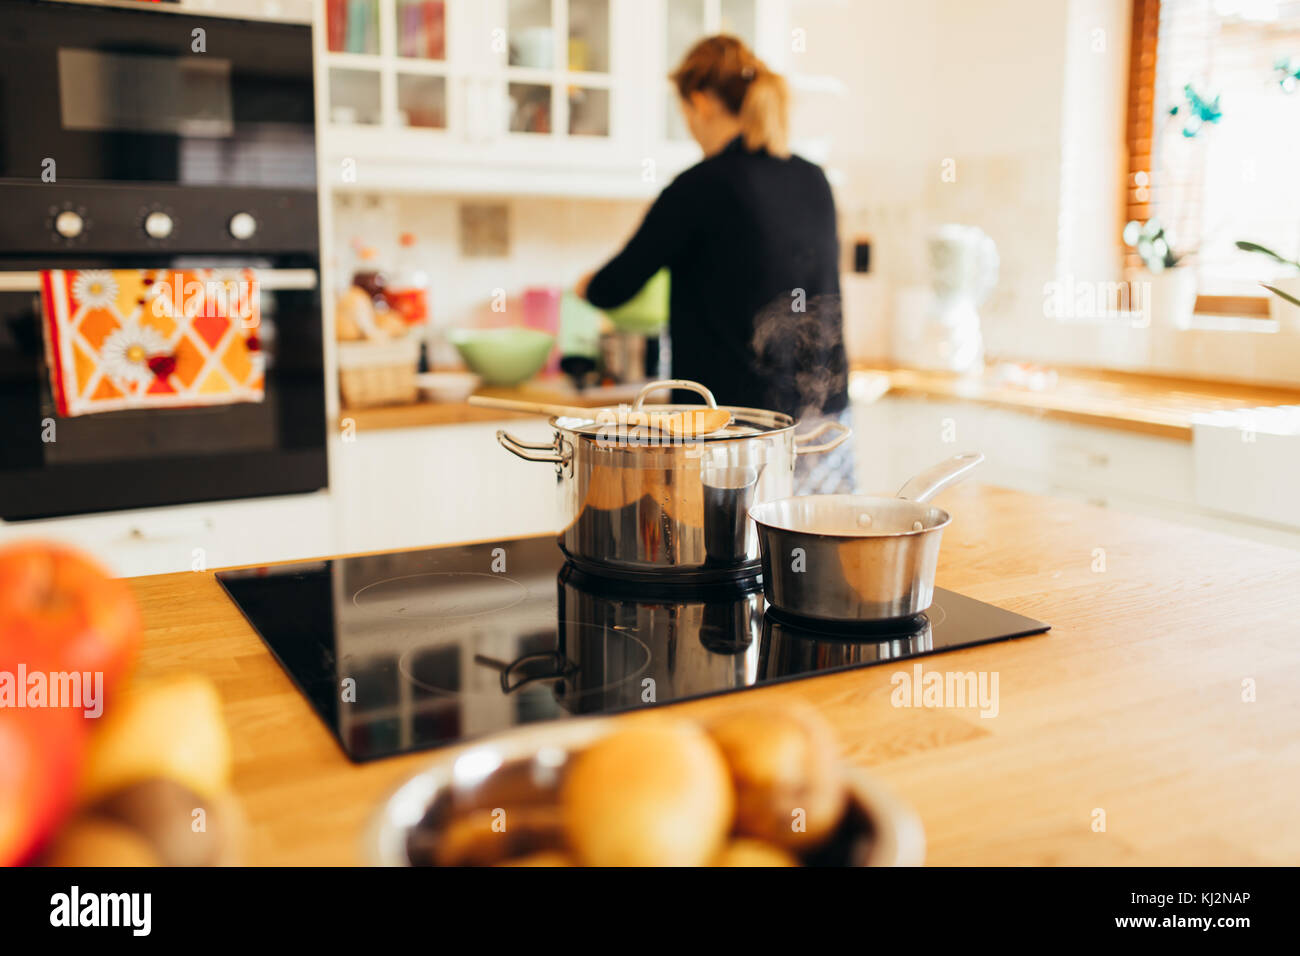 Housewife making lunch in kitchen Stock Photo